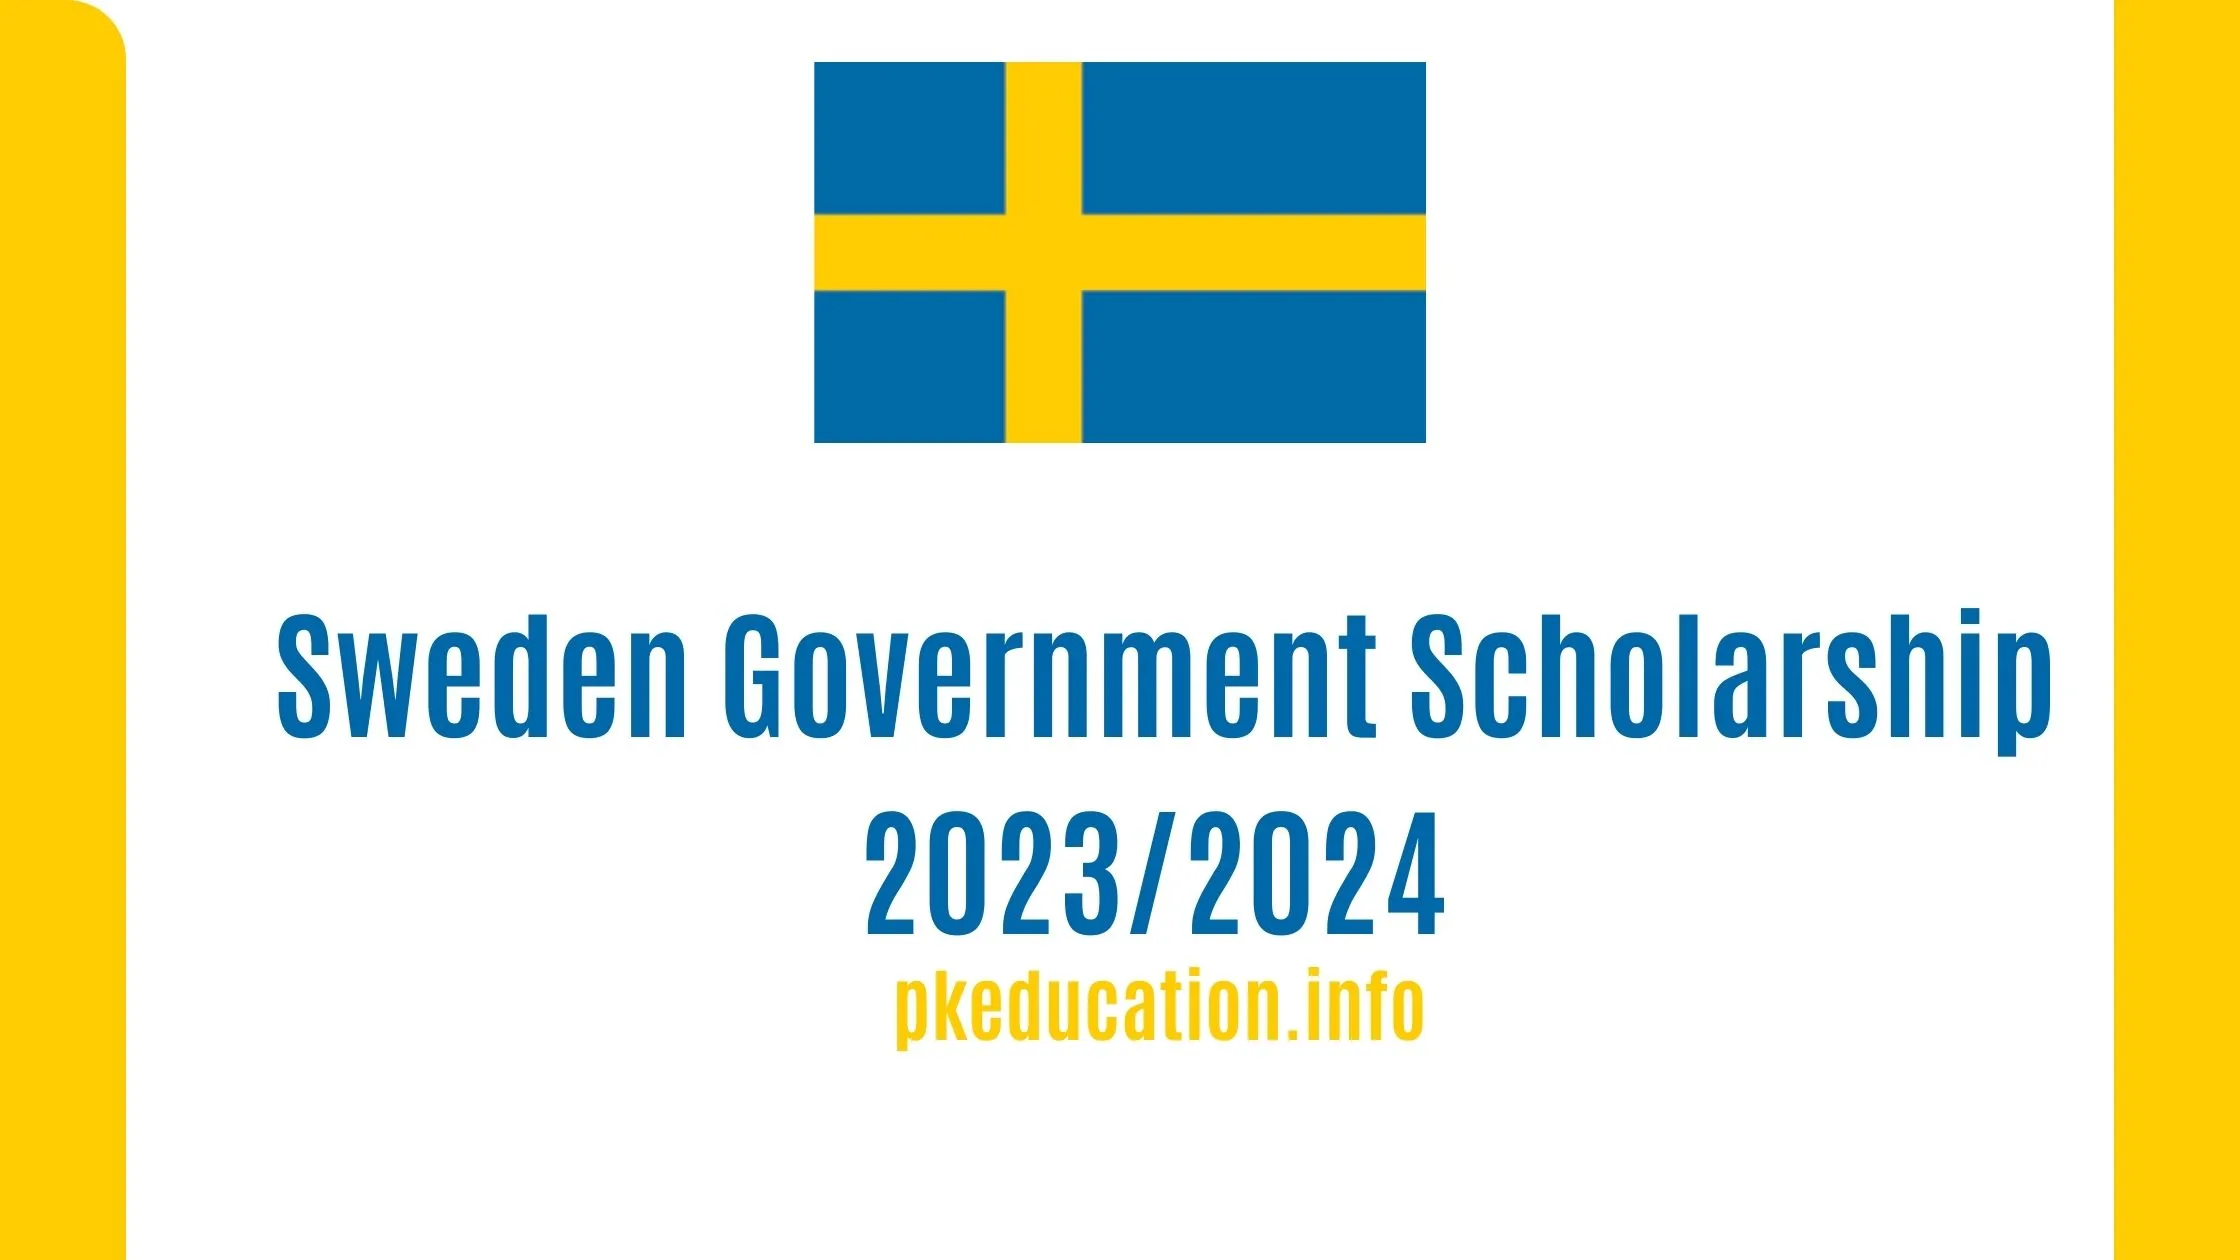 Sweden Government Scholarship 2023/2024